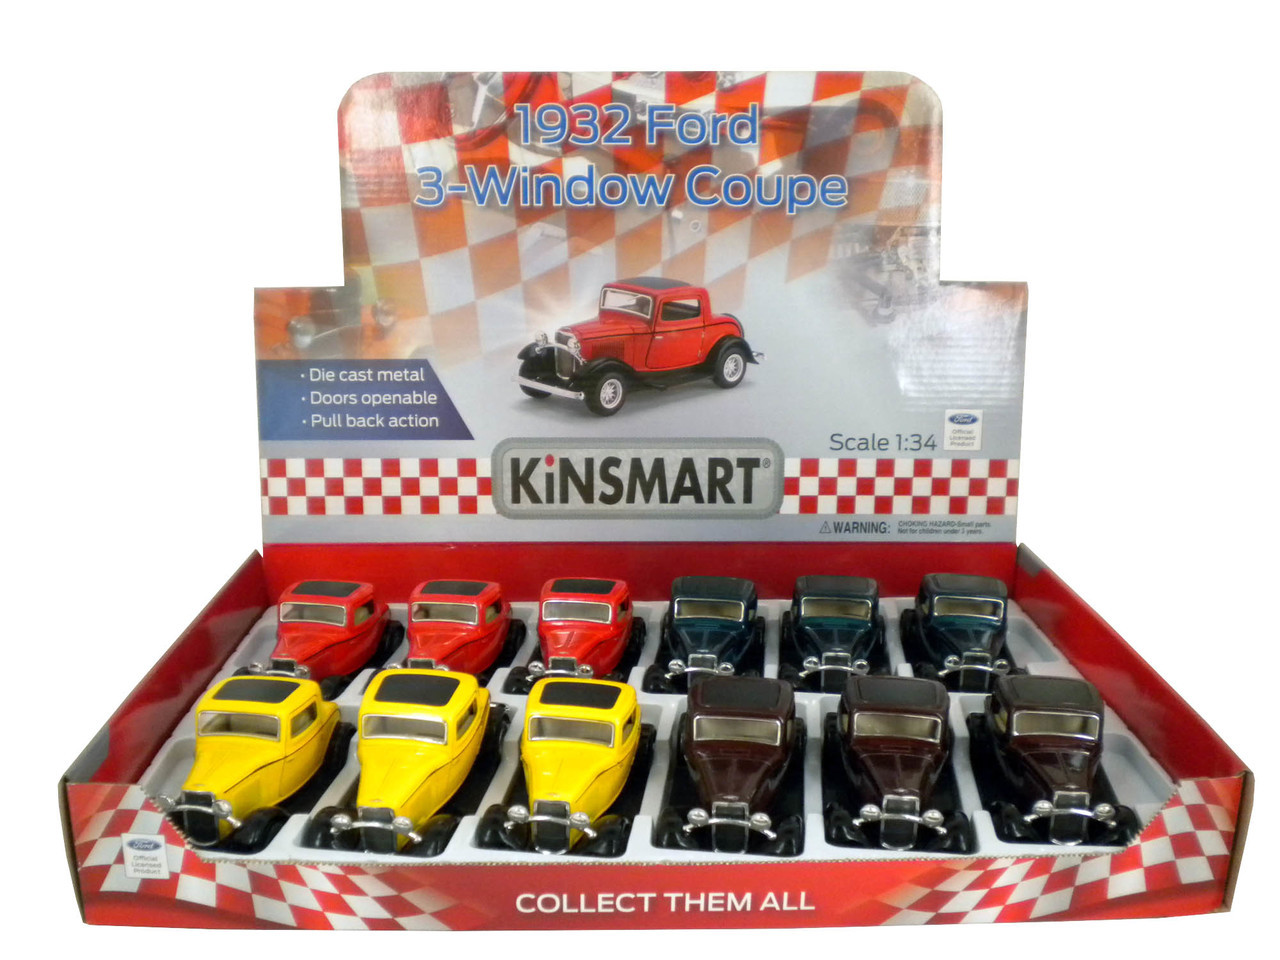 KiNSMART Set of 4: 5 1932 Ford 3-Window Coupe 1:34 Scale Toy Multicolor KT5332D Green/Maroon/Red/Yellow 